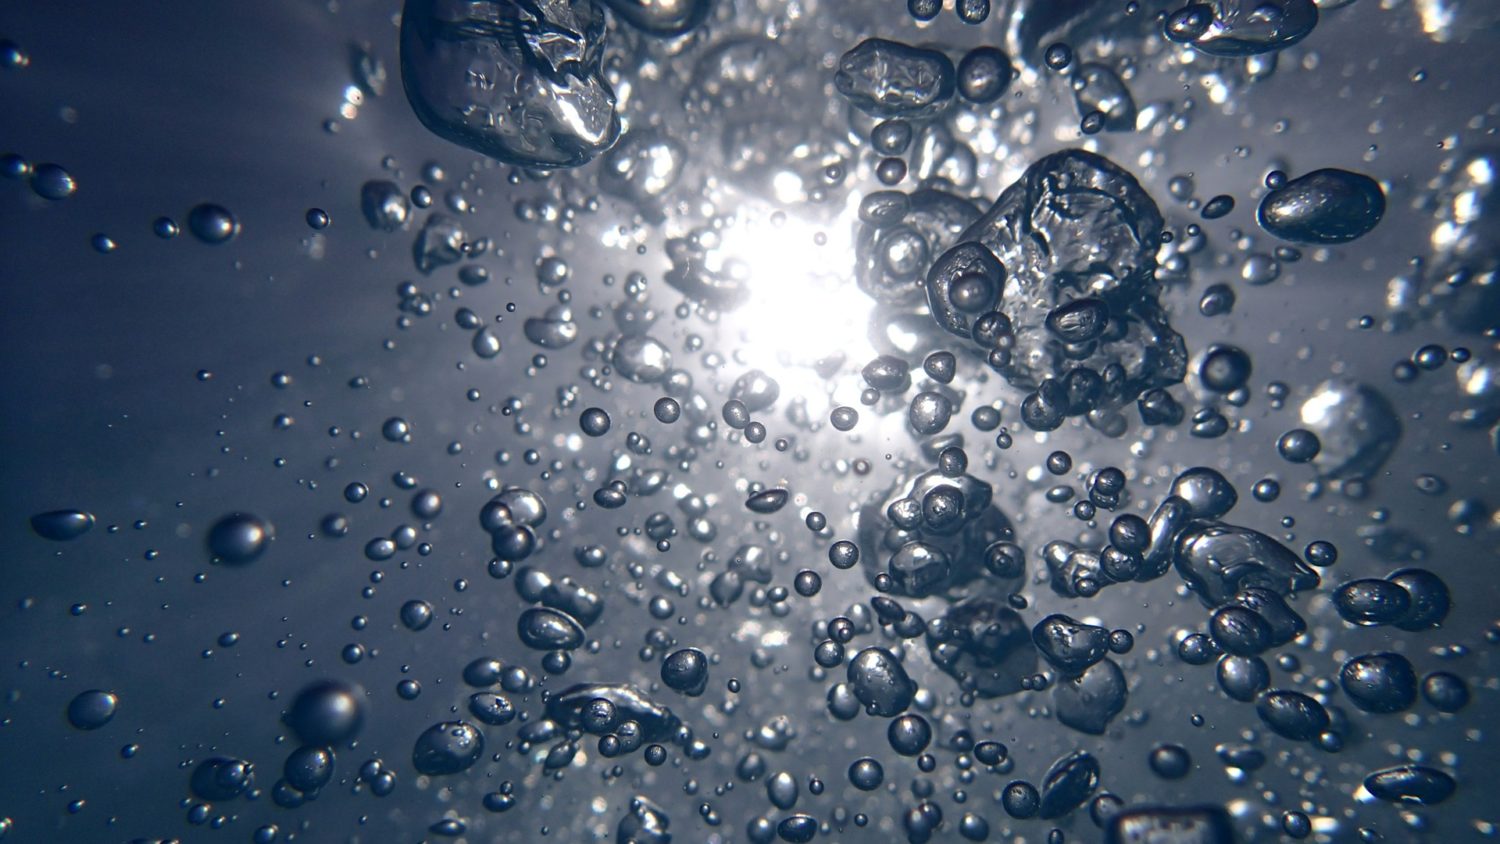 water droplets on a blue surface